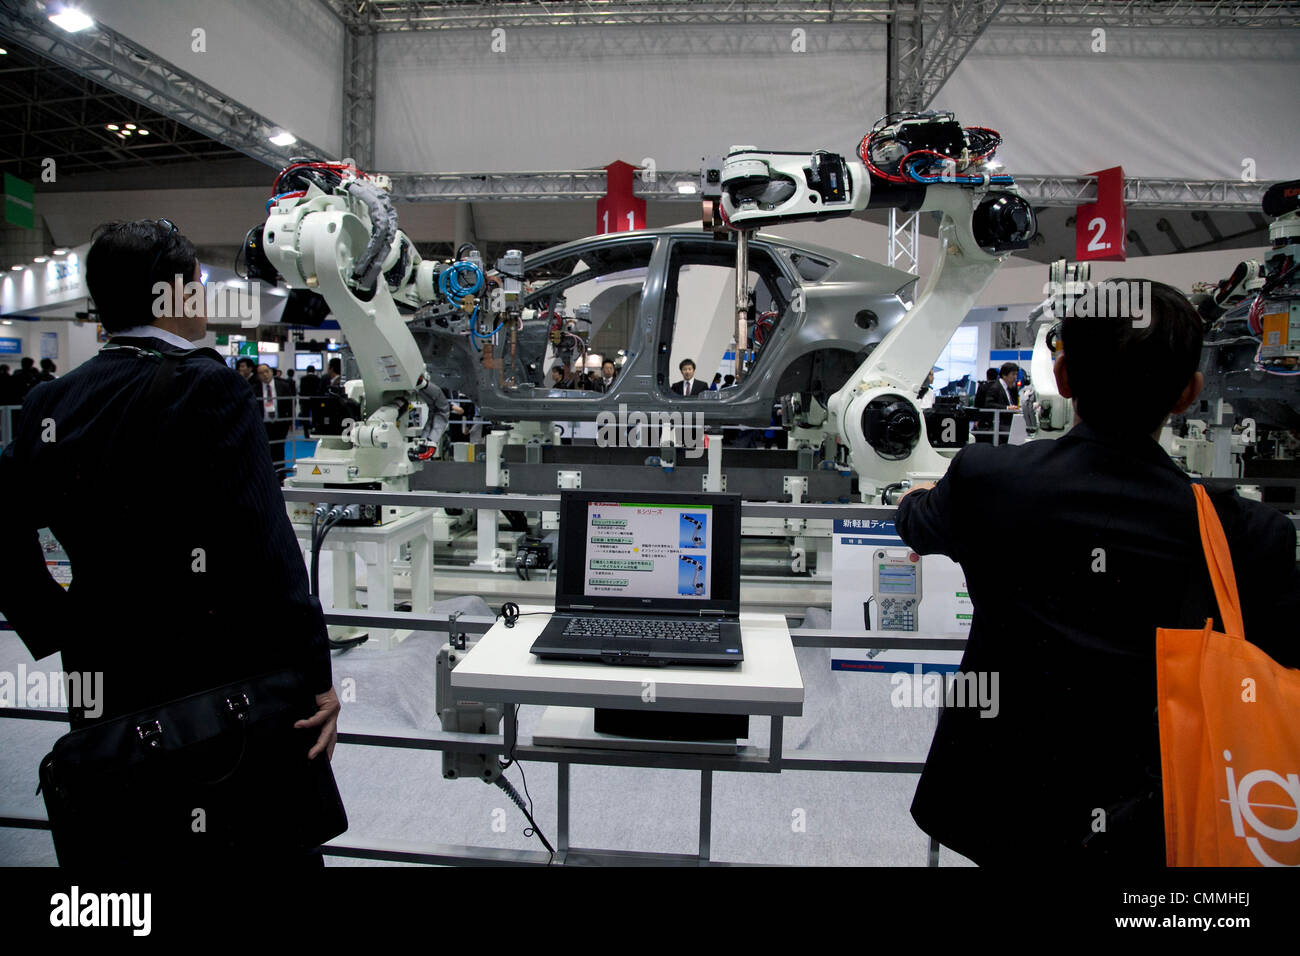 Tokyo, Japan. 6th Nov, 2013. Visitors see the Kawazaki 'Body Assembly' system performance at the International Robot Exhibition 2013 in Tokyo, Japan, November 6, 2013. The IREX is the largest robot trade fair in the world and shows new robots and high technology equipments at theTokyo International Big Sight. The exhibitions runs from November 6 to 9. © Rodrigo Reyes Marin/AFLO/Alamy Live News Stock Photo